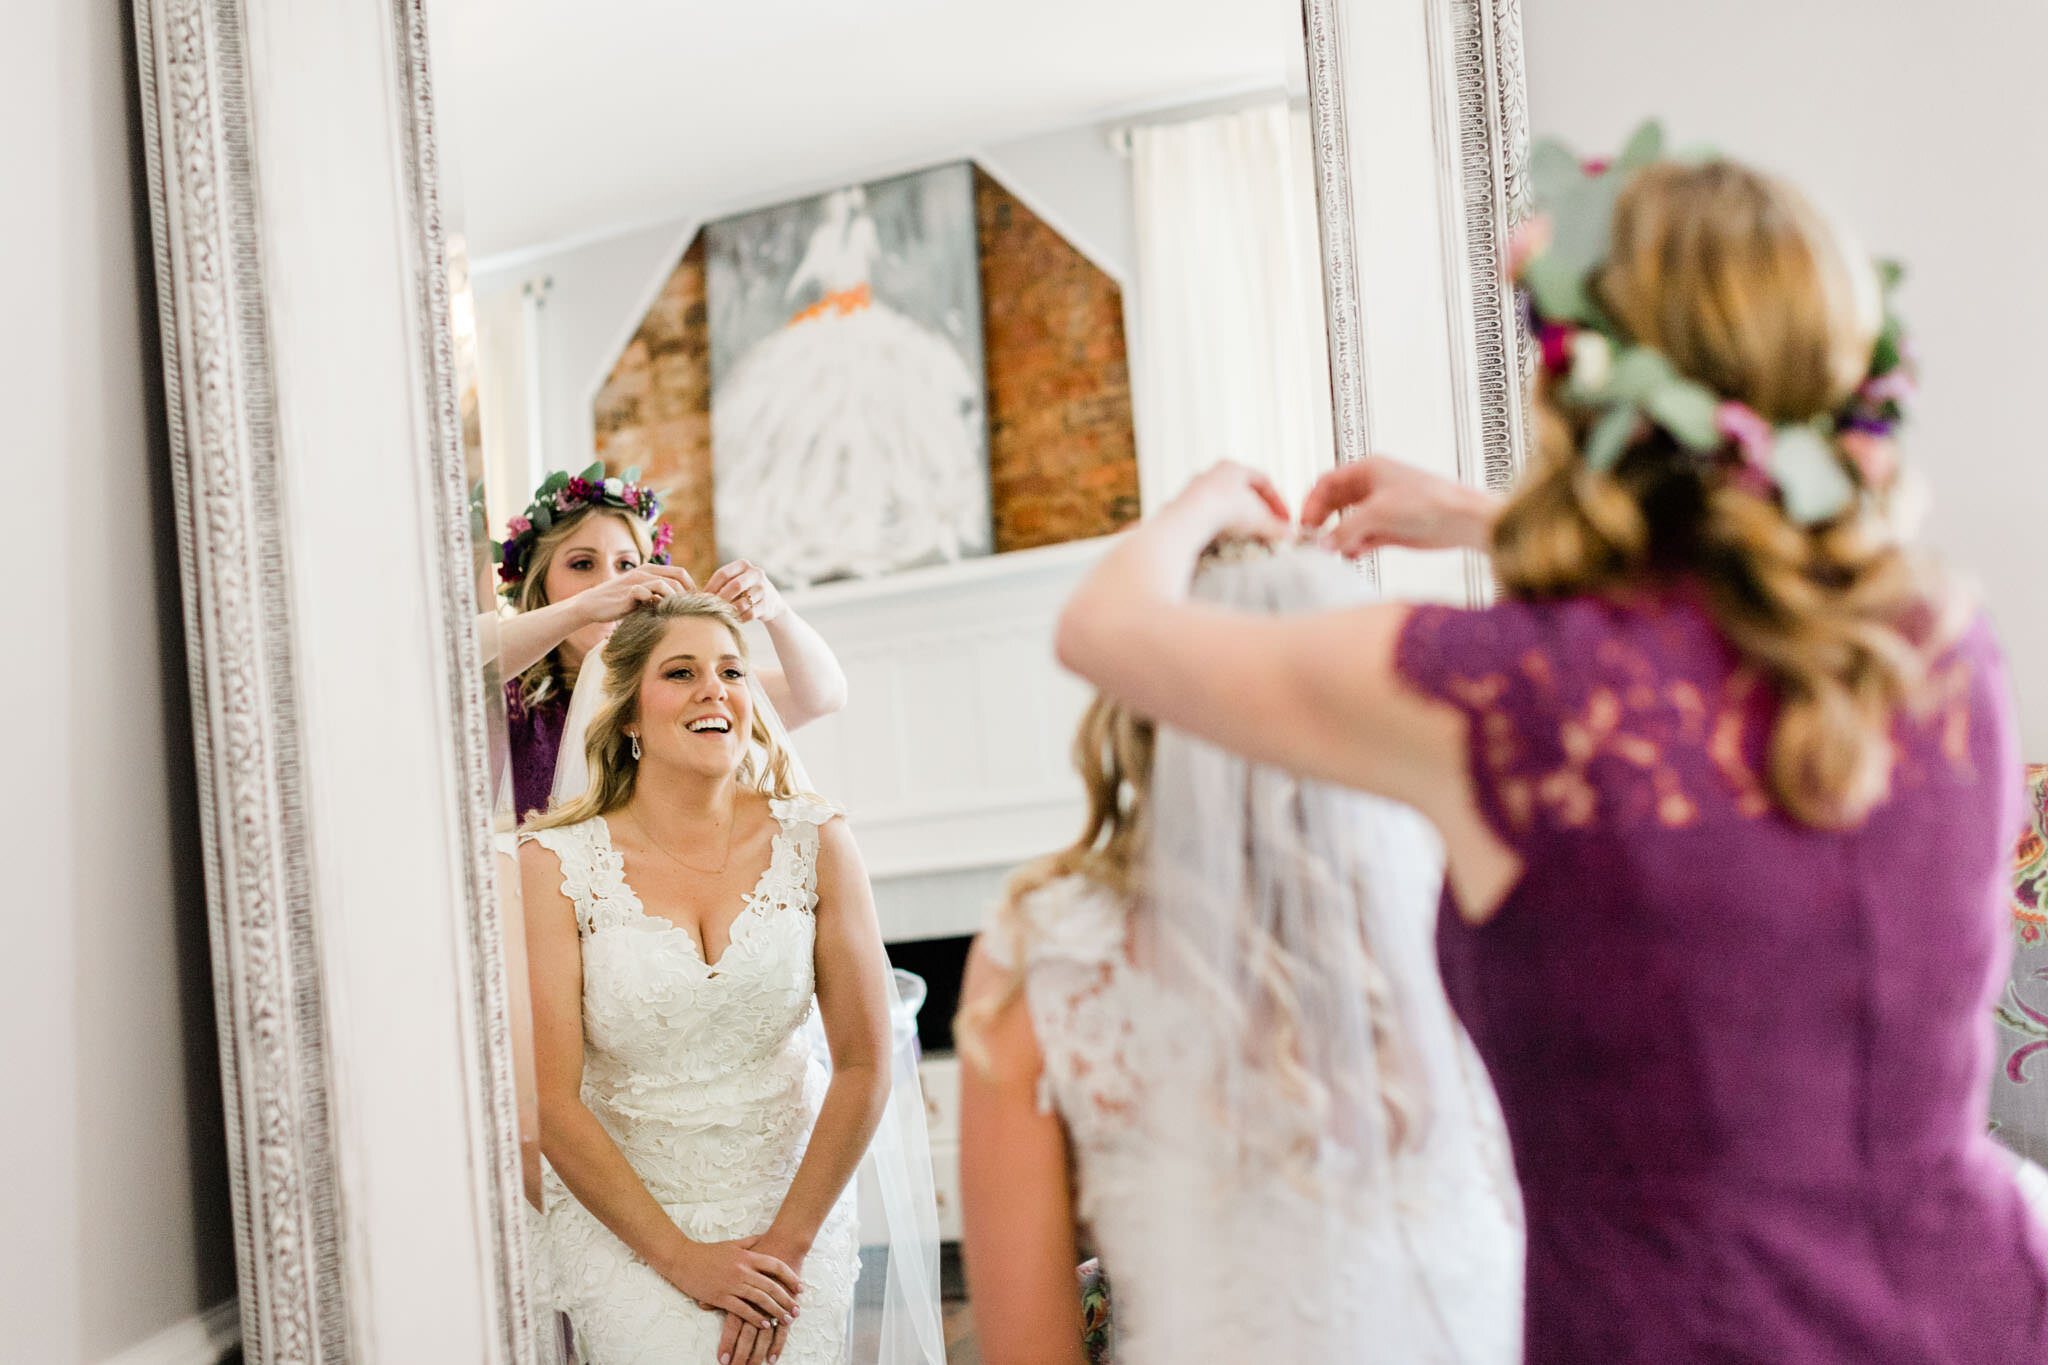 Durham Wedding Photographer | By G. Lin Photography | Bridesmaid putting veil on bride in front of mirror